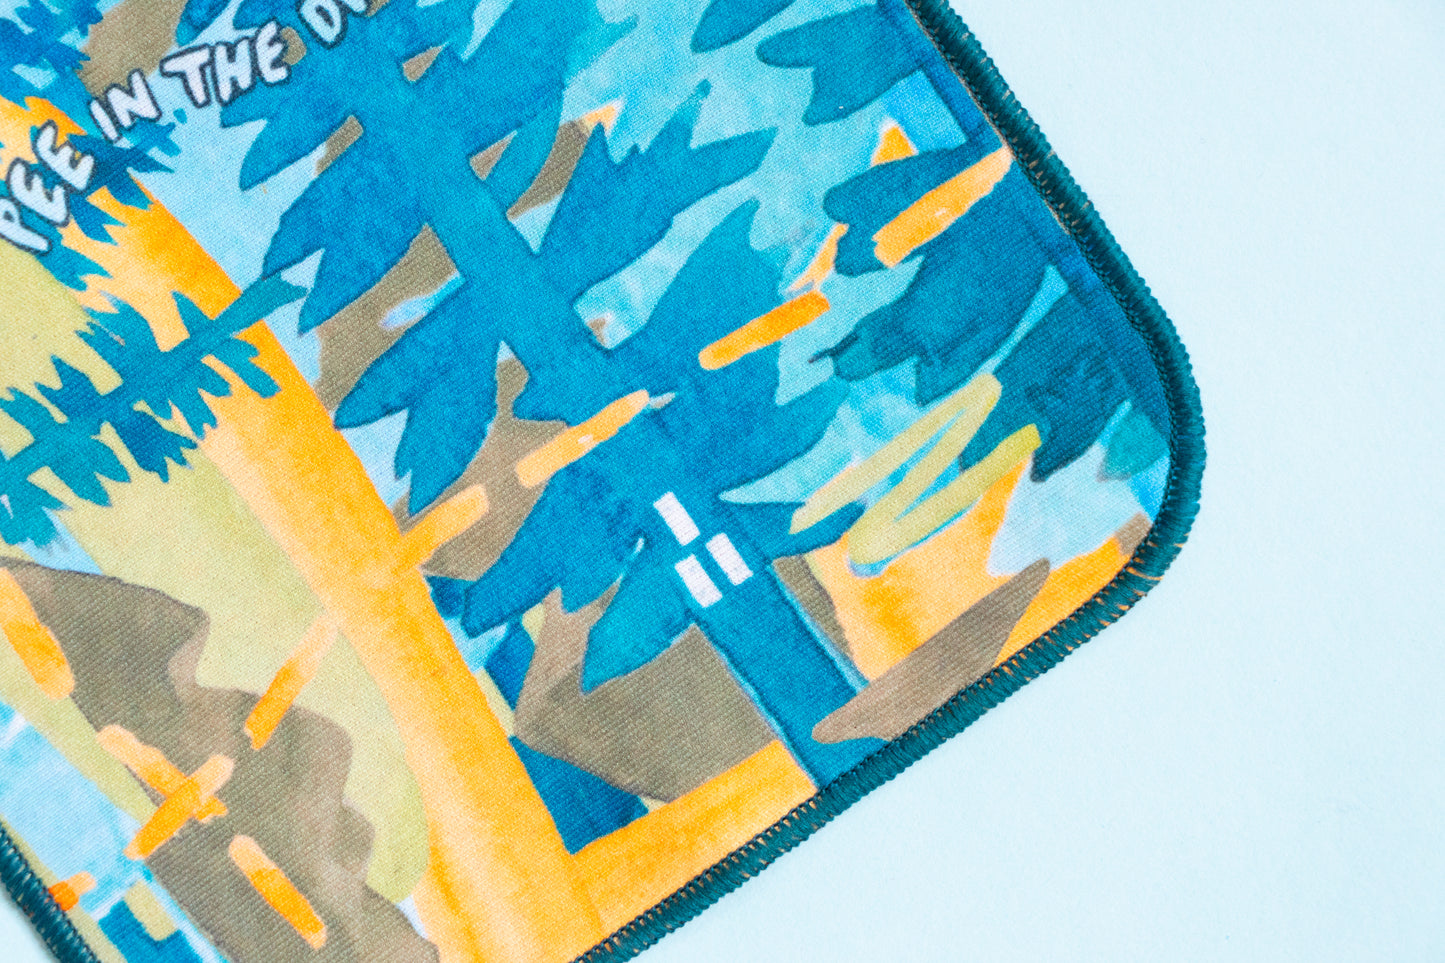 The bottom corner of the Trails and Kula cloth collaboration is visible. The square cloth is painted with an abstract landscape of trees and light in various shades of blue and yellow. Along sone side, the words "Pee in the Dirt." are written. 